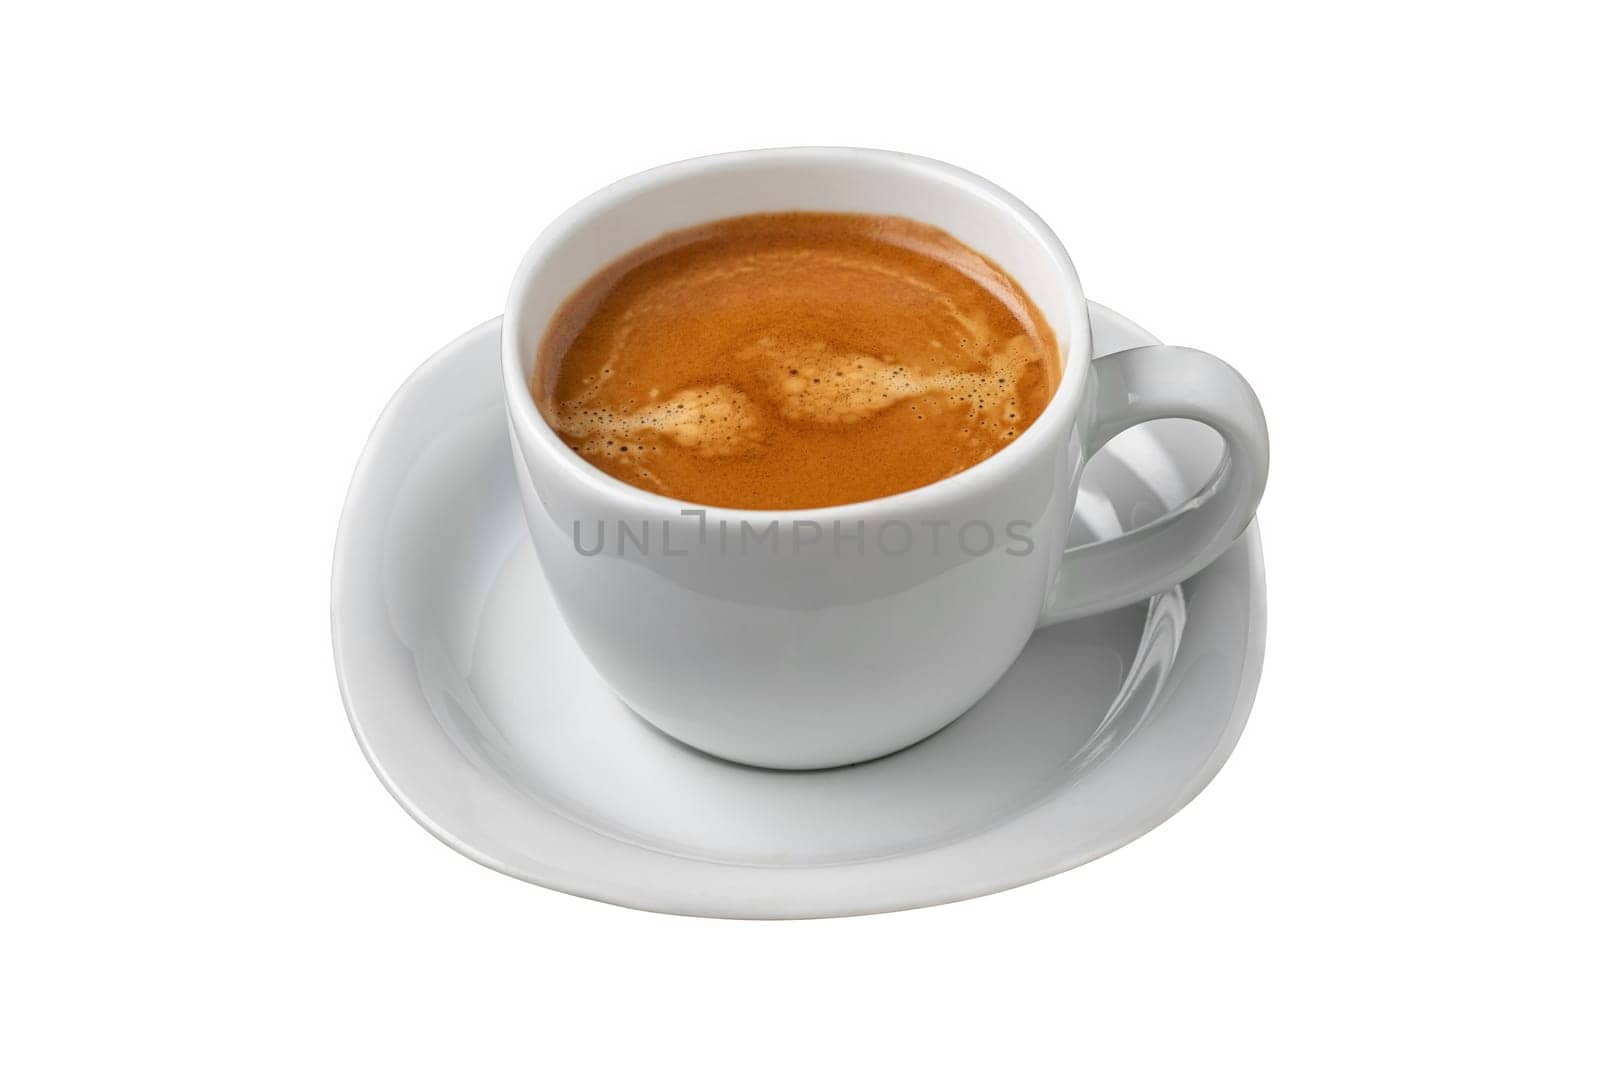 Fresh double espresso coffee and coffee beans on white background by Sonat